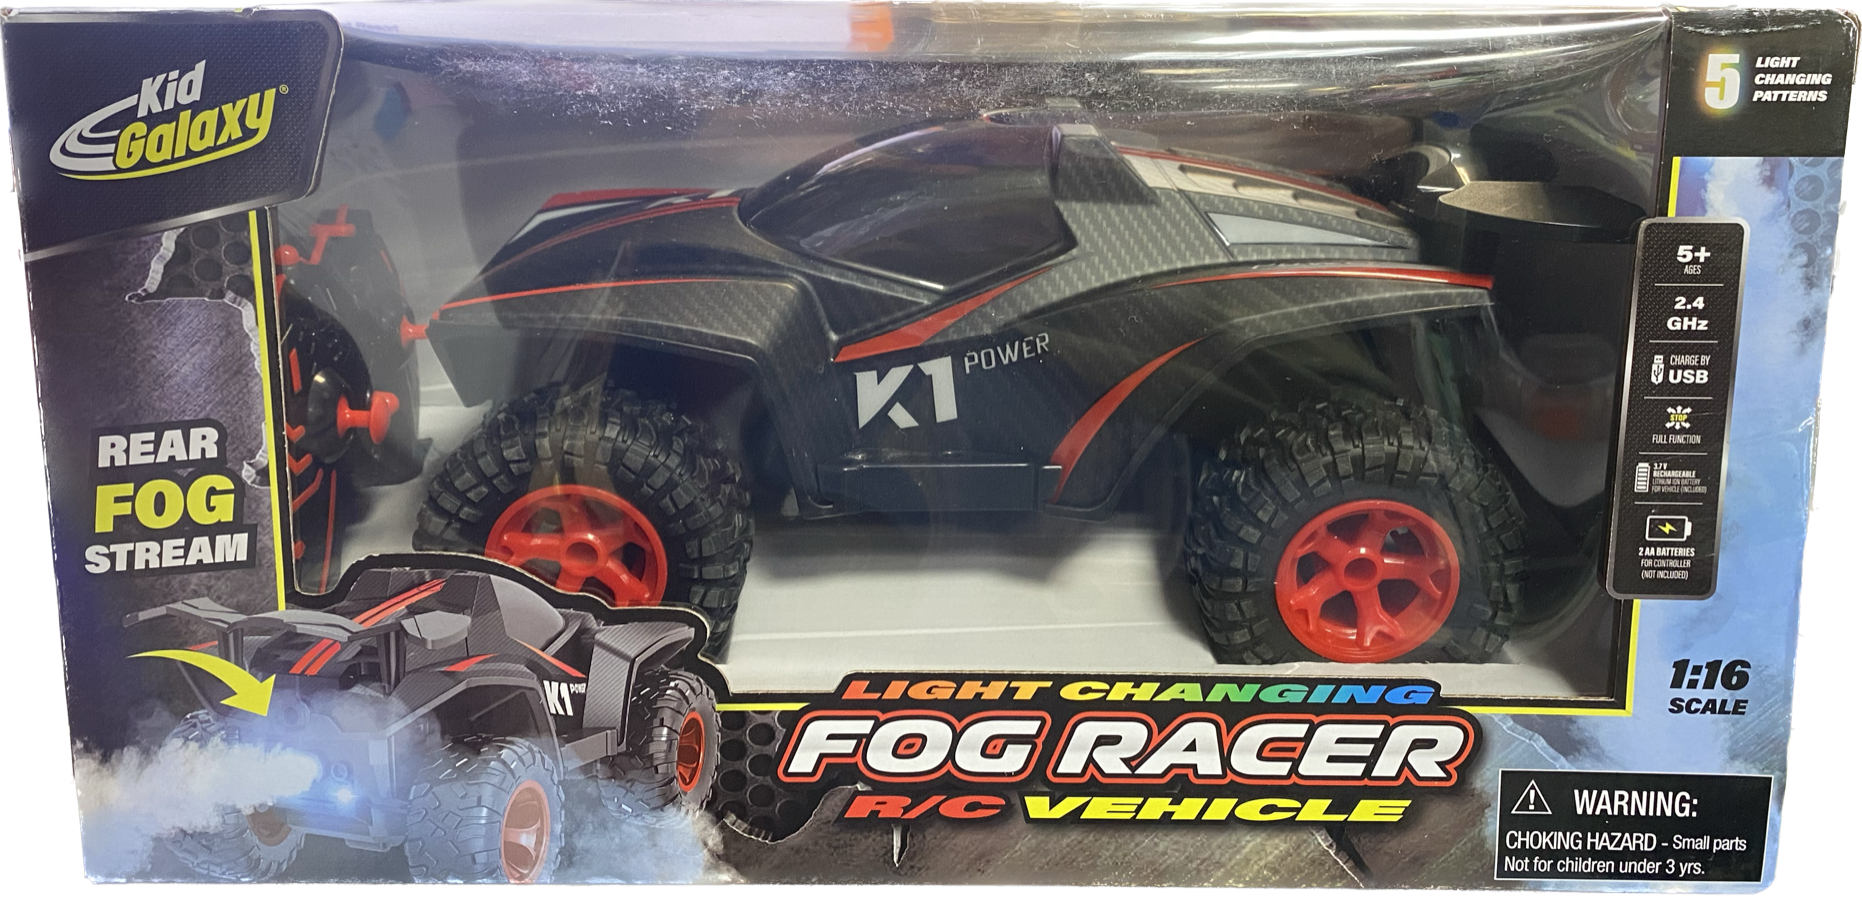 Kid Galaxy Light Changing Fog Racer Remote Control Vehicle